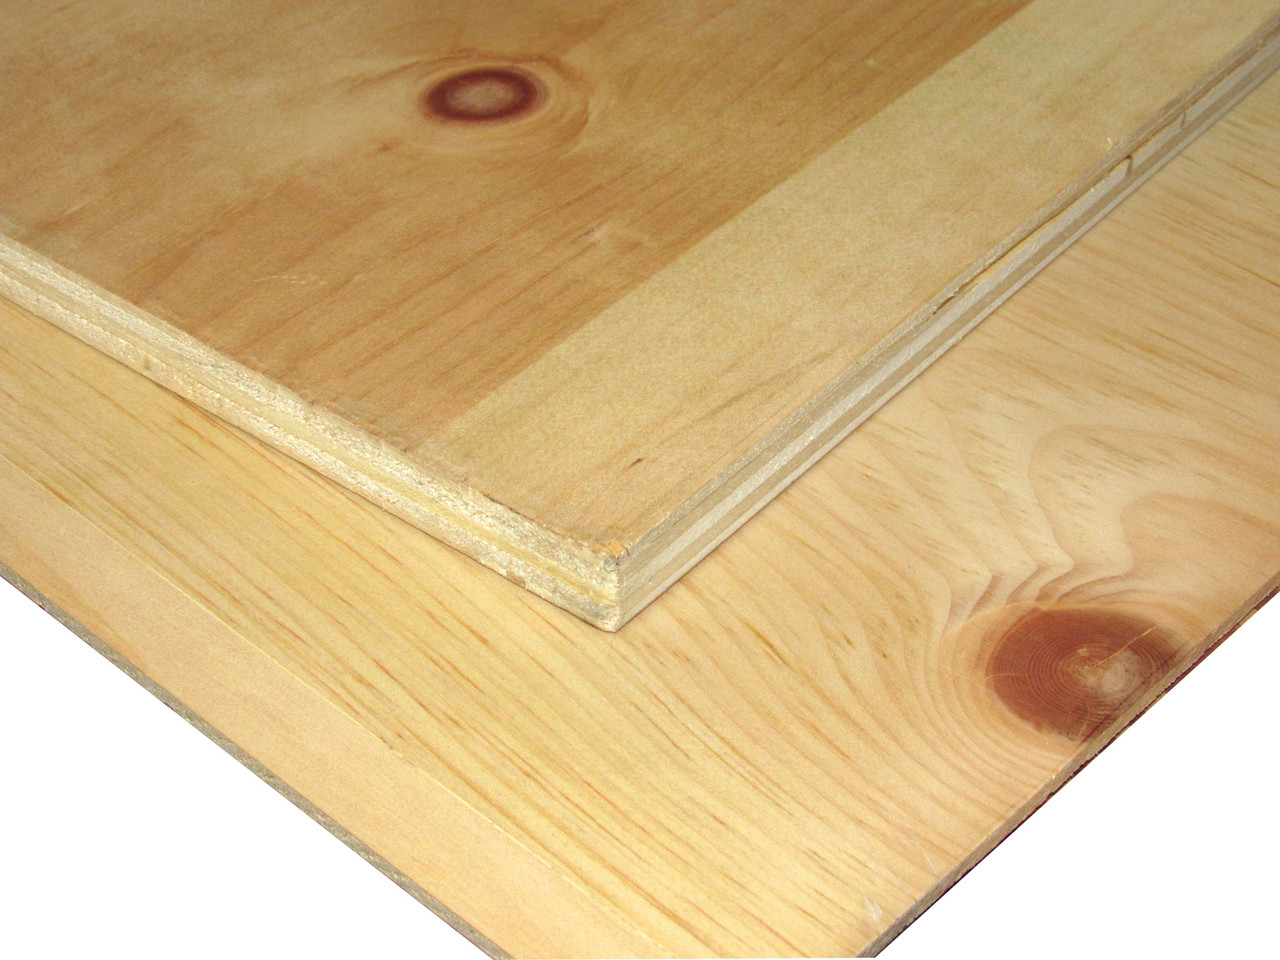 Pine (Knotty) Plywood Full Sheets 48"x96" (4' x 8') Total Wood Store